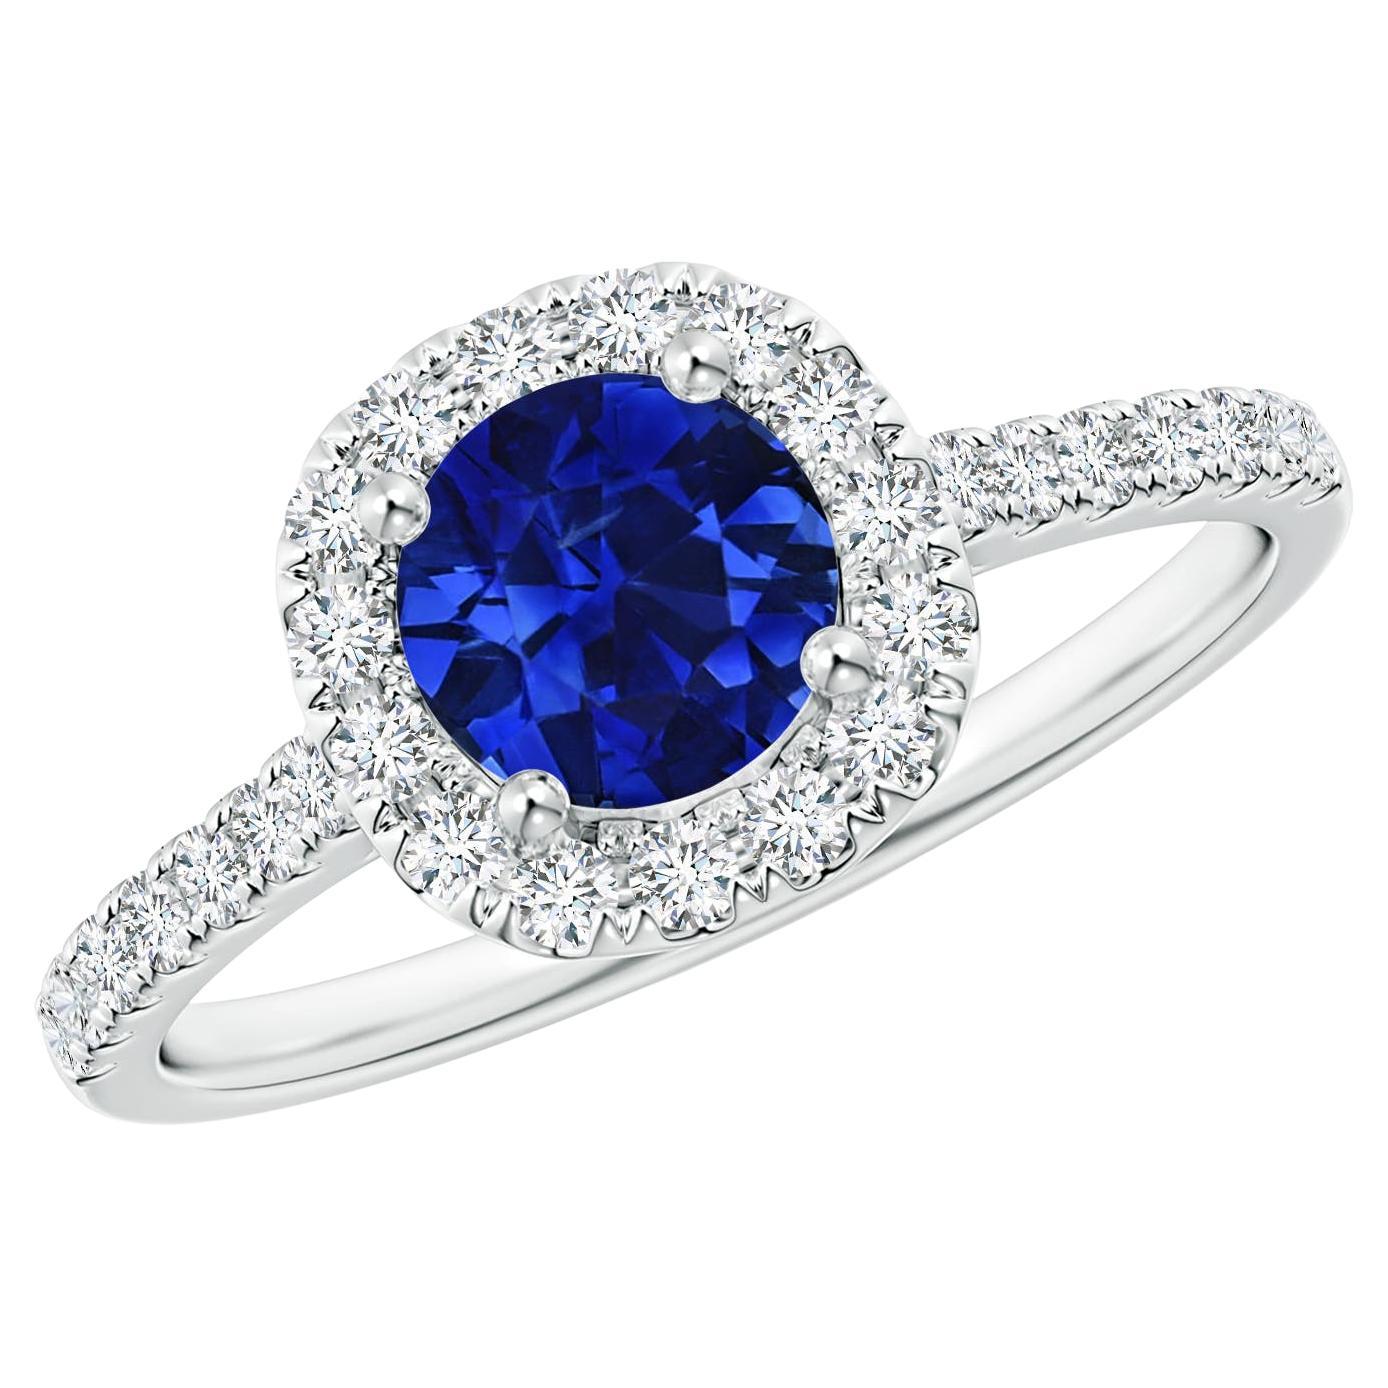 For Sale:  GIA Certified Natural Sapphire Halo Platinum Ring with Diamond Accents